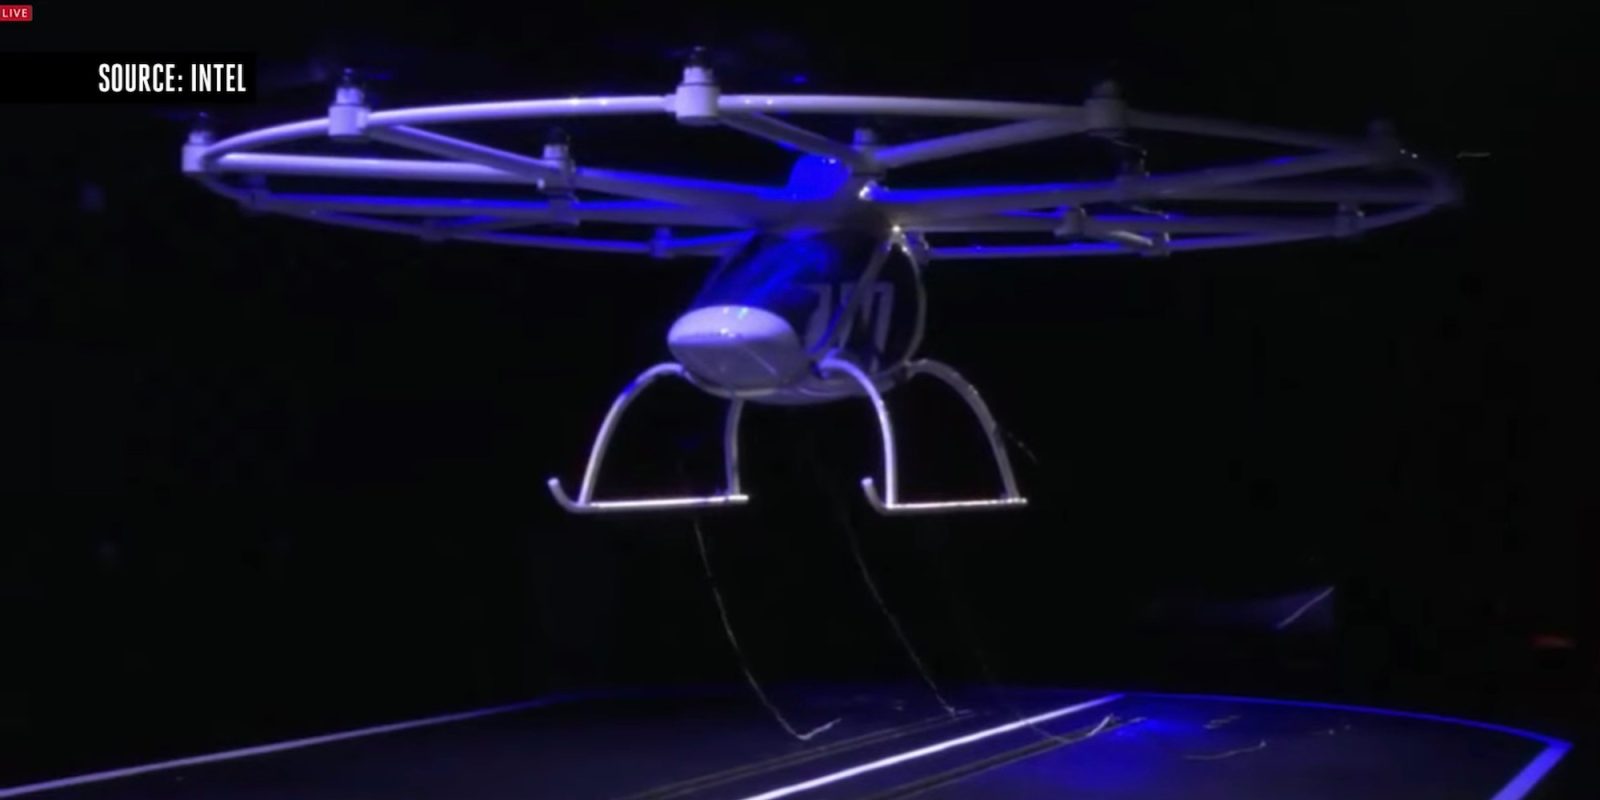 Volocopter VC200 2X made its maiden flight in North America during CES 2018